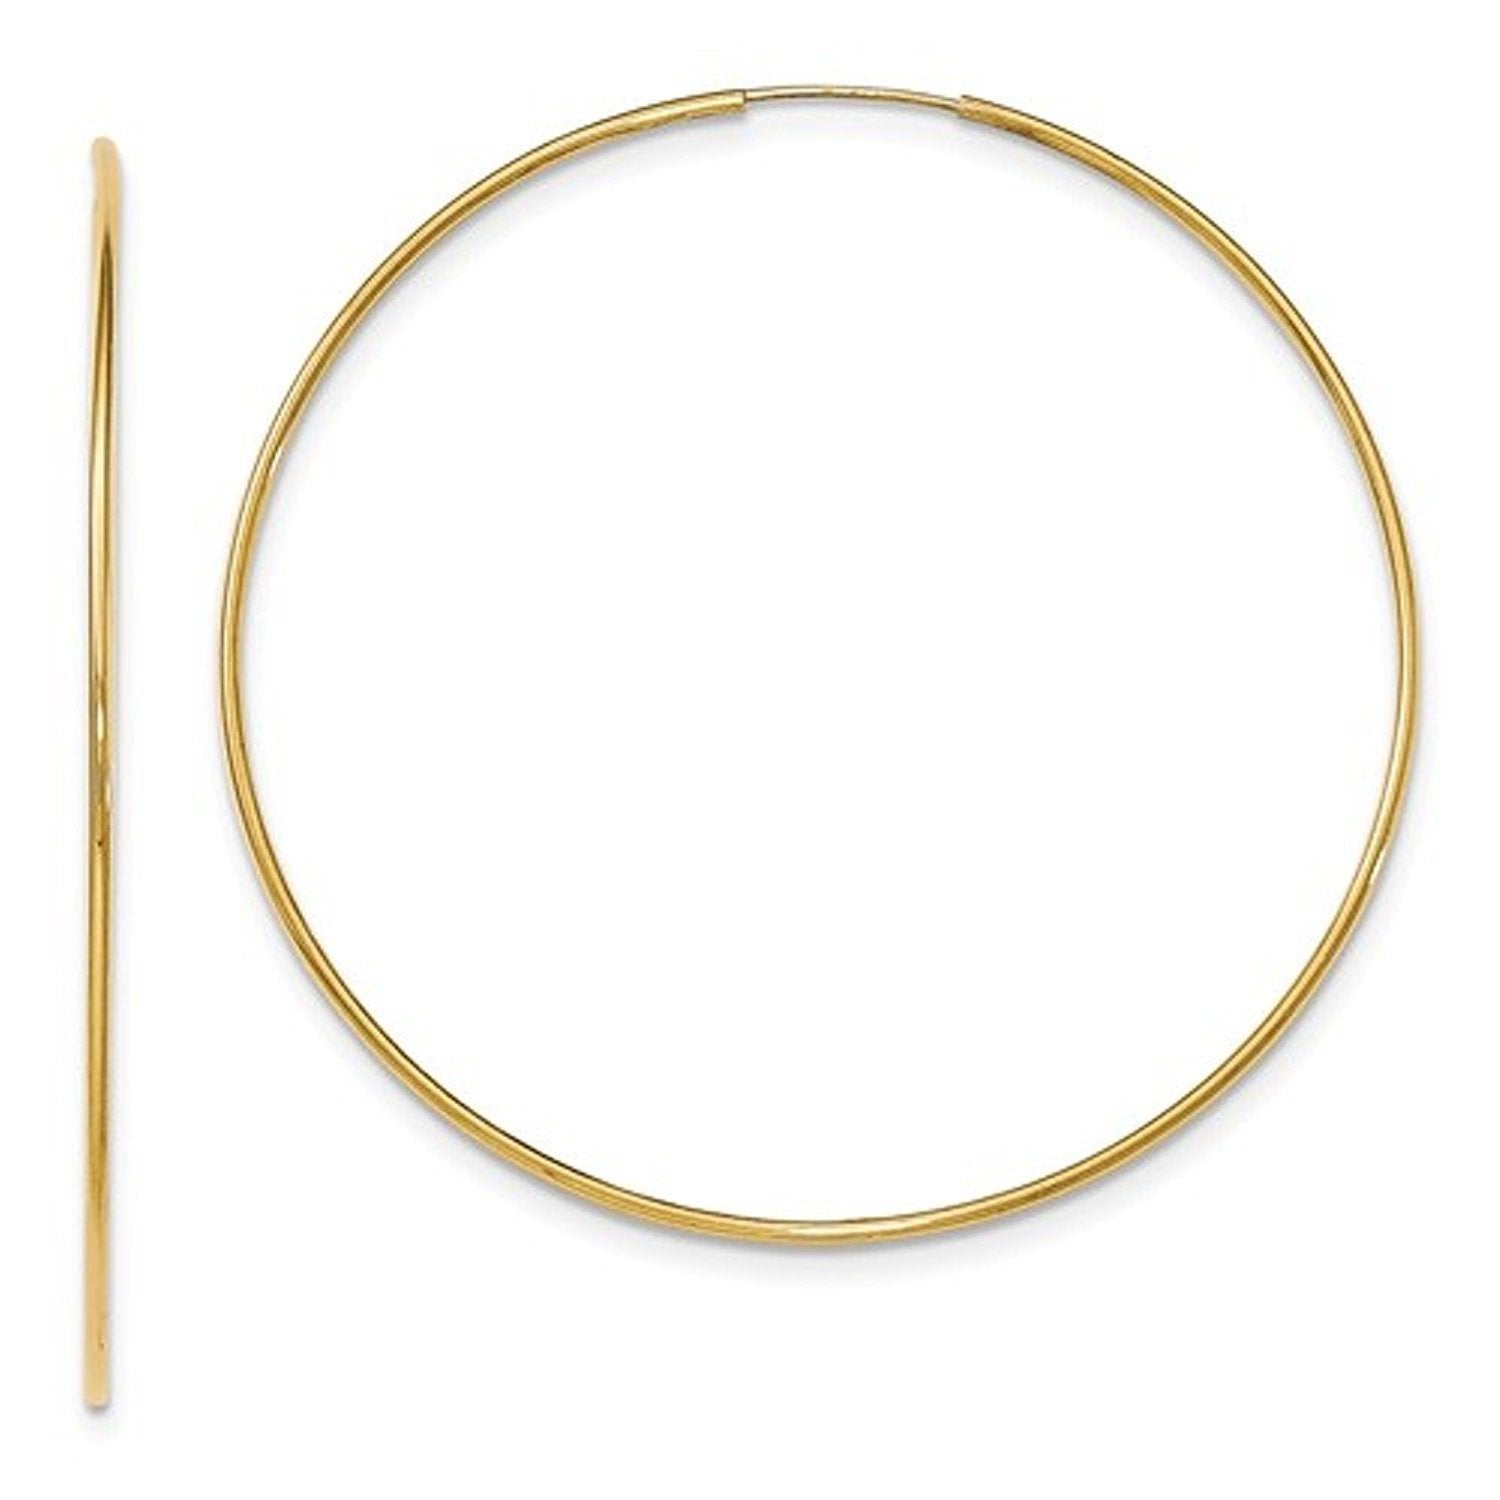 14K Yellow Gold 65mm x 1.2mm Round Endless Hoop Earrings